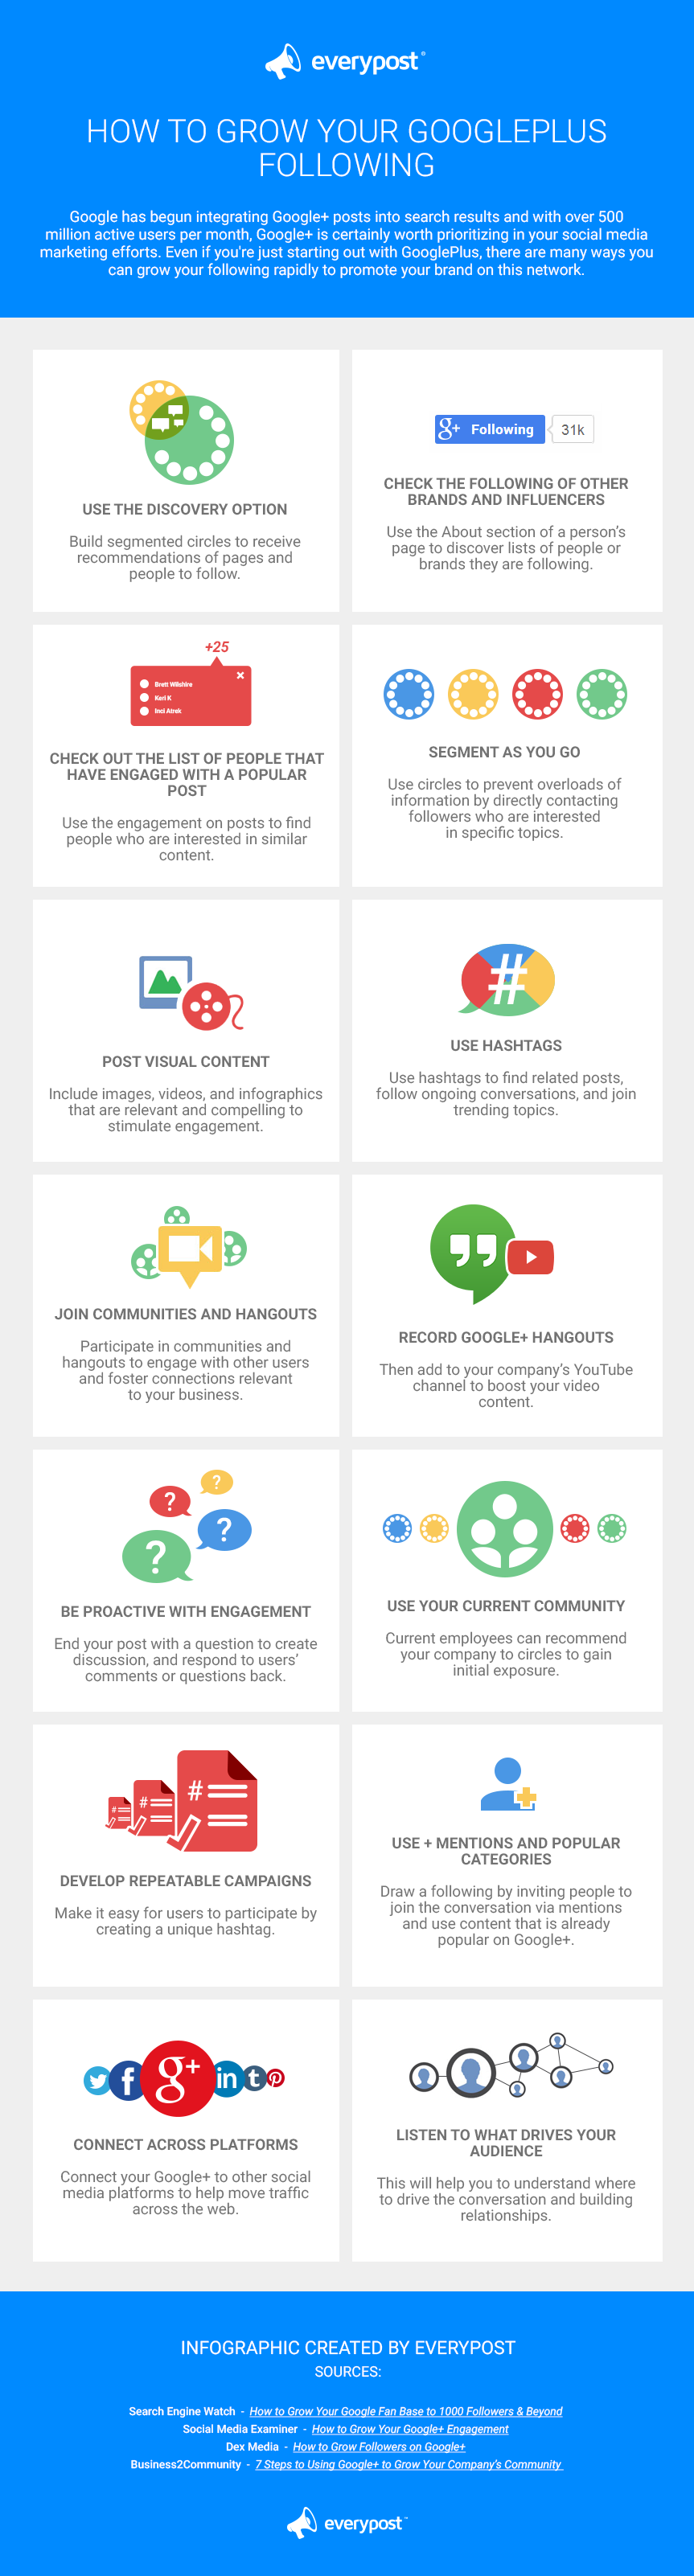 14 ways to grow your audience on Google+